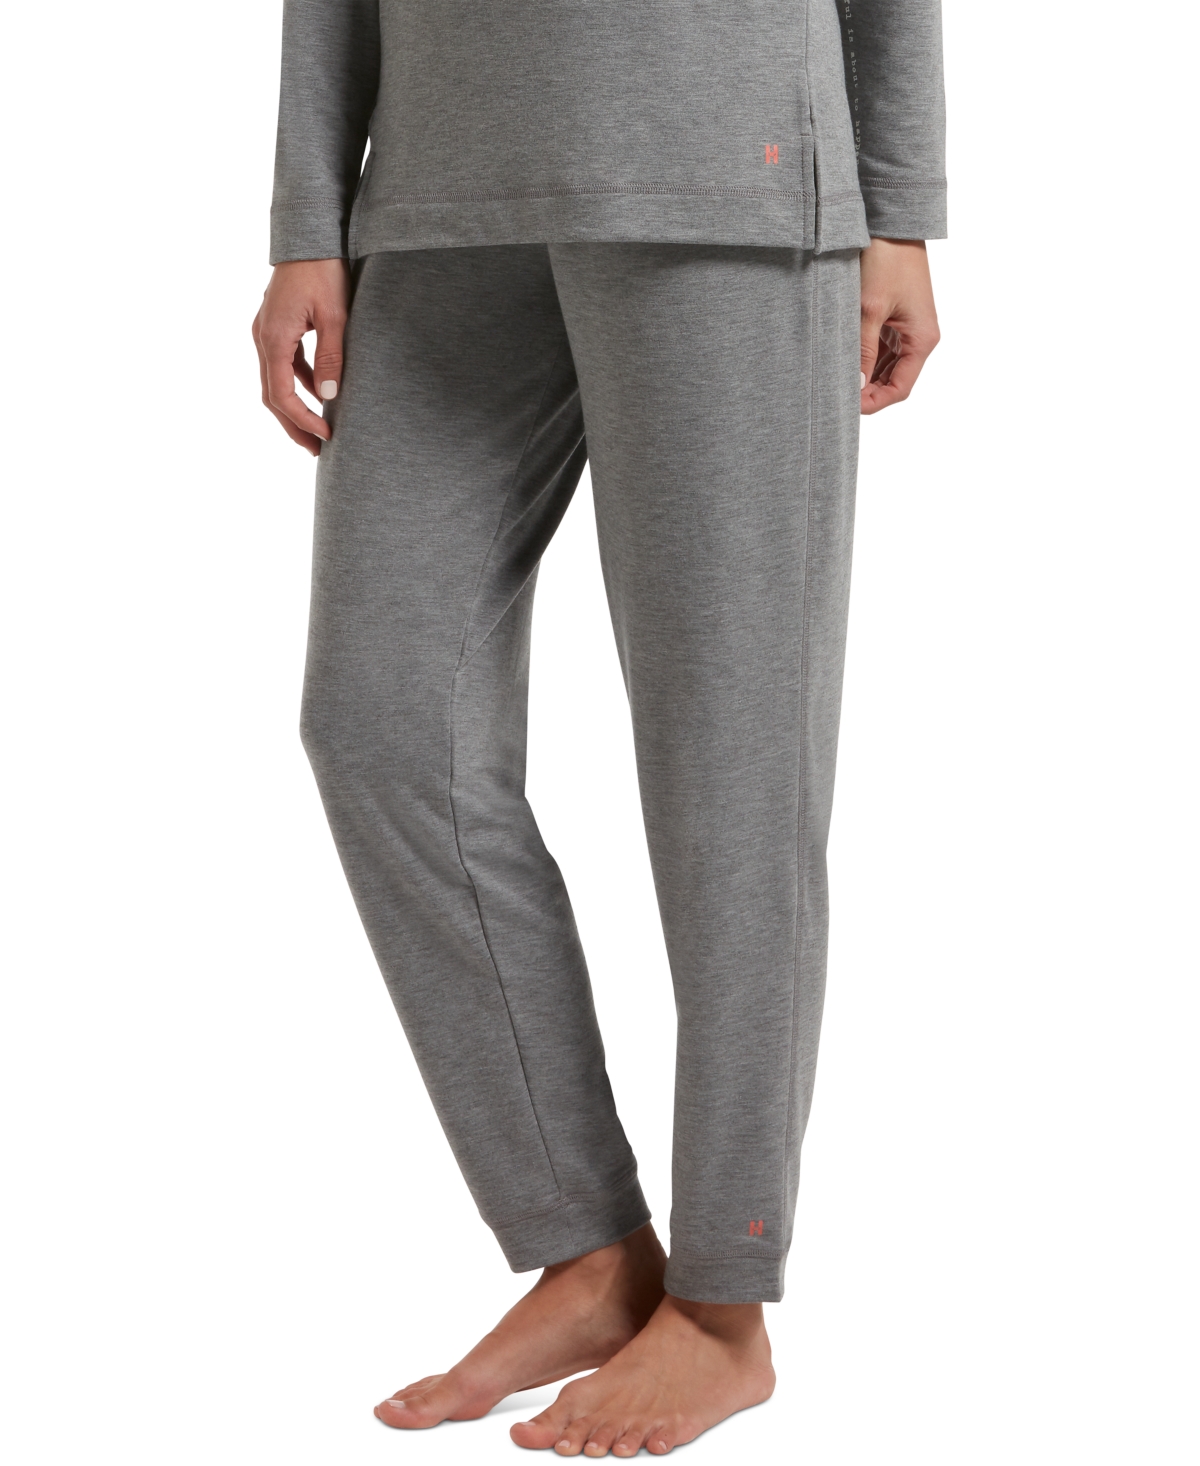 HUE SUPER-SOFT FRENCH TERRY CUFFED LOUNGE PANTS